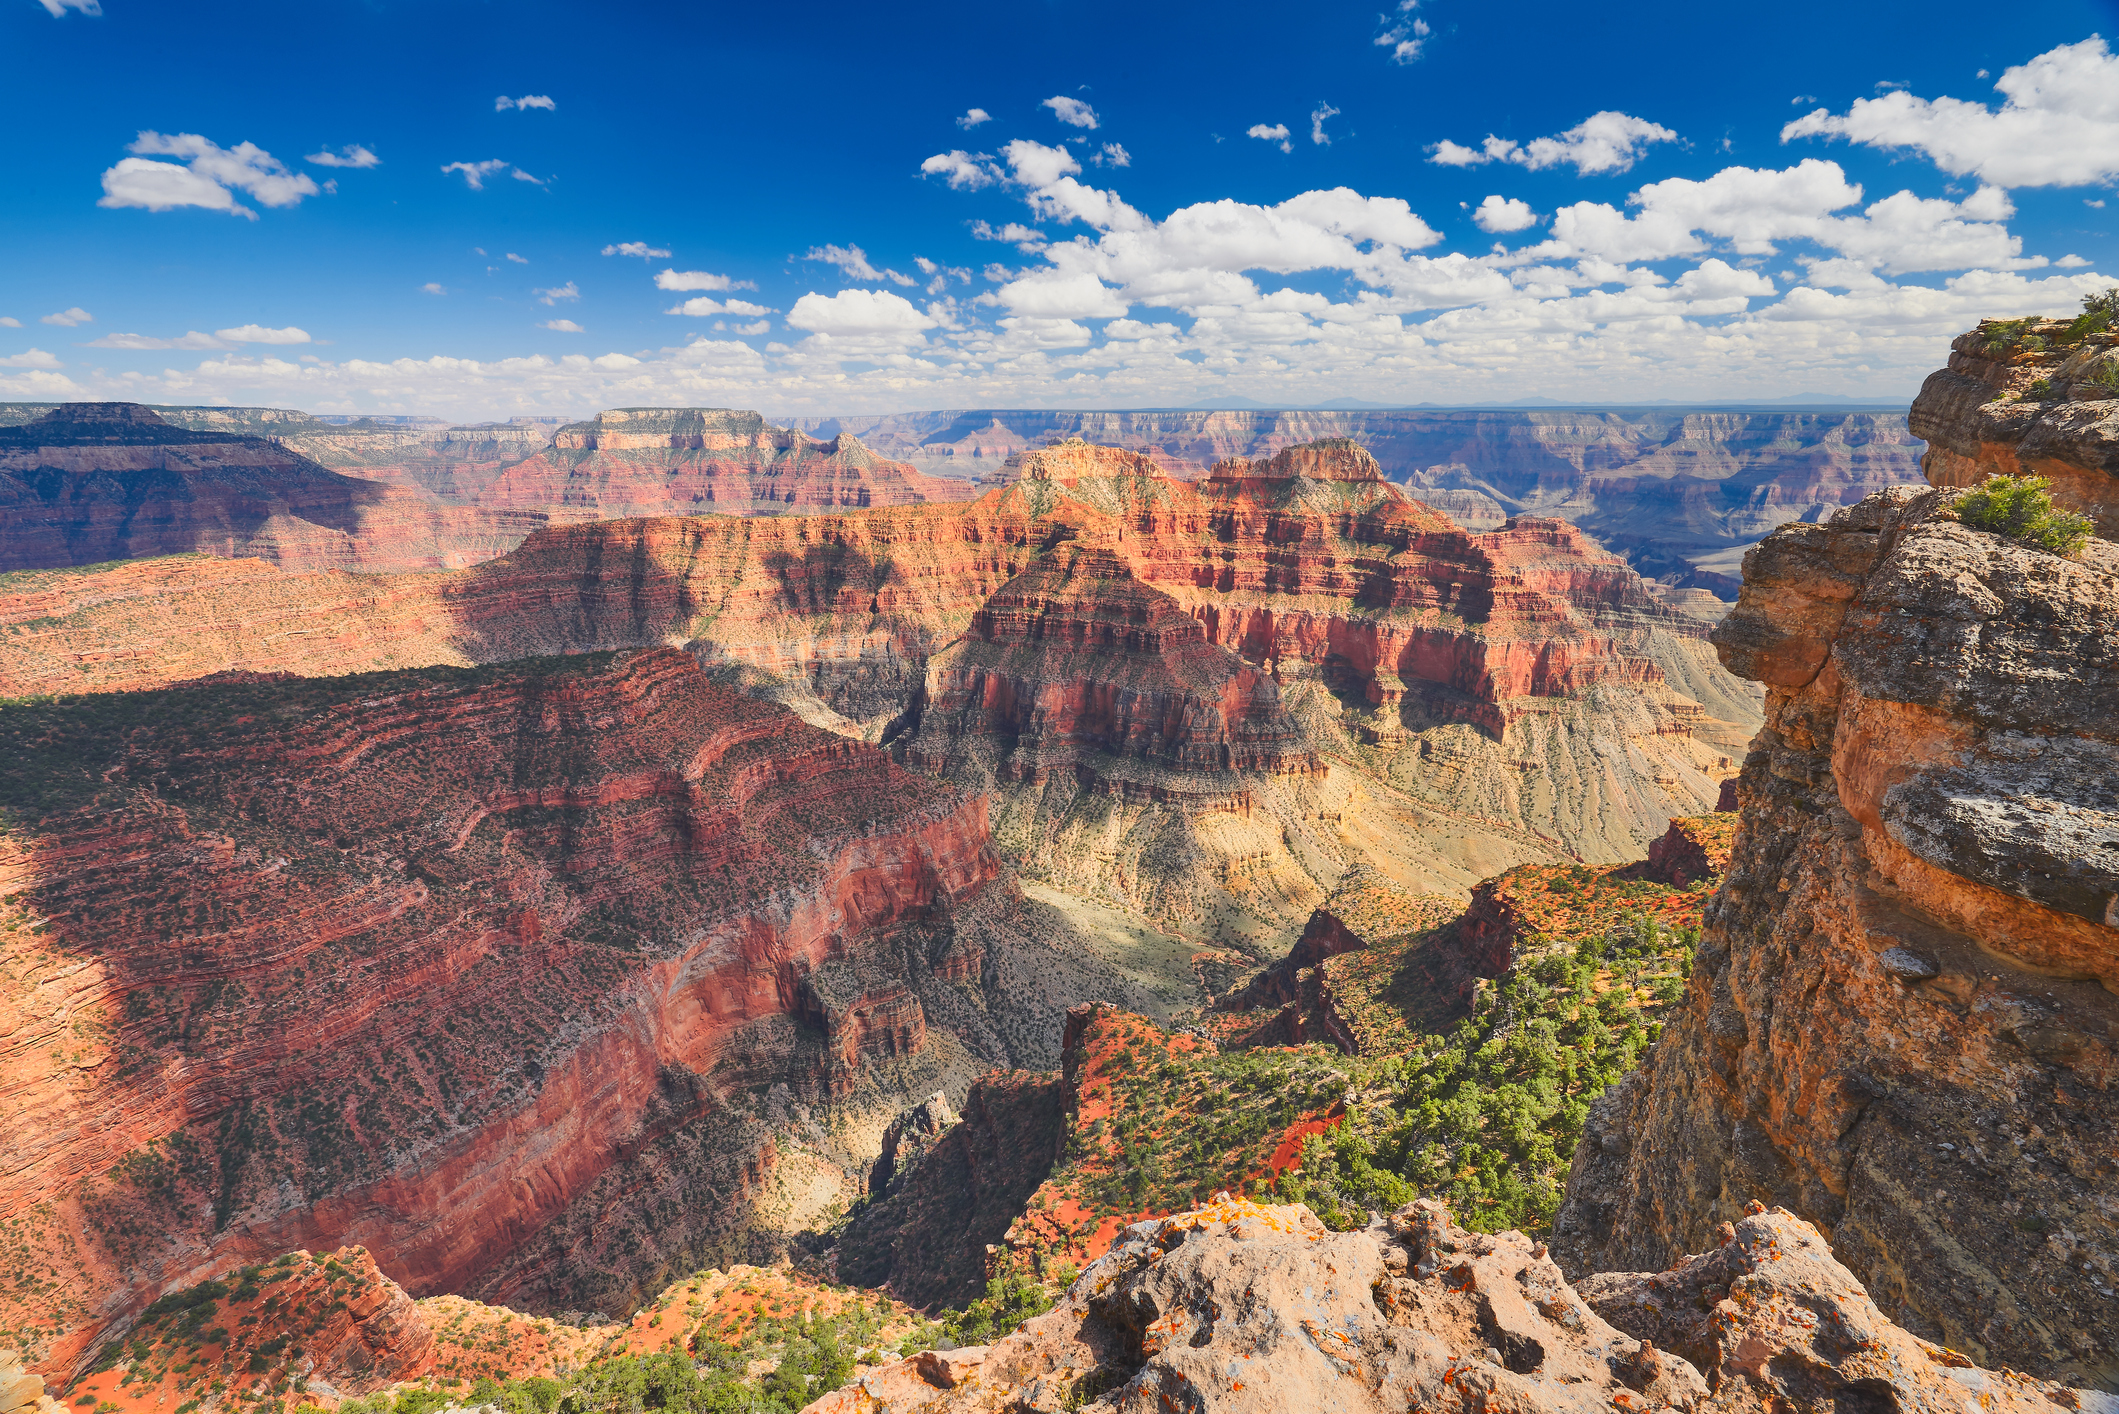 Grand Canyon National Park is one of the most iconic landscapes in America